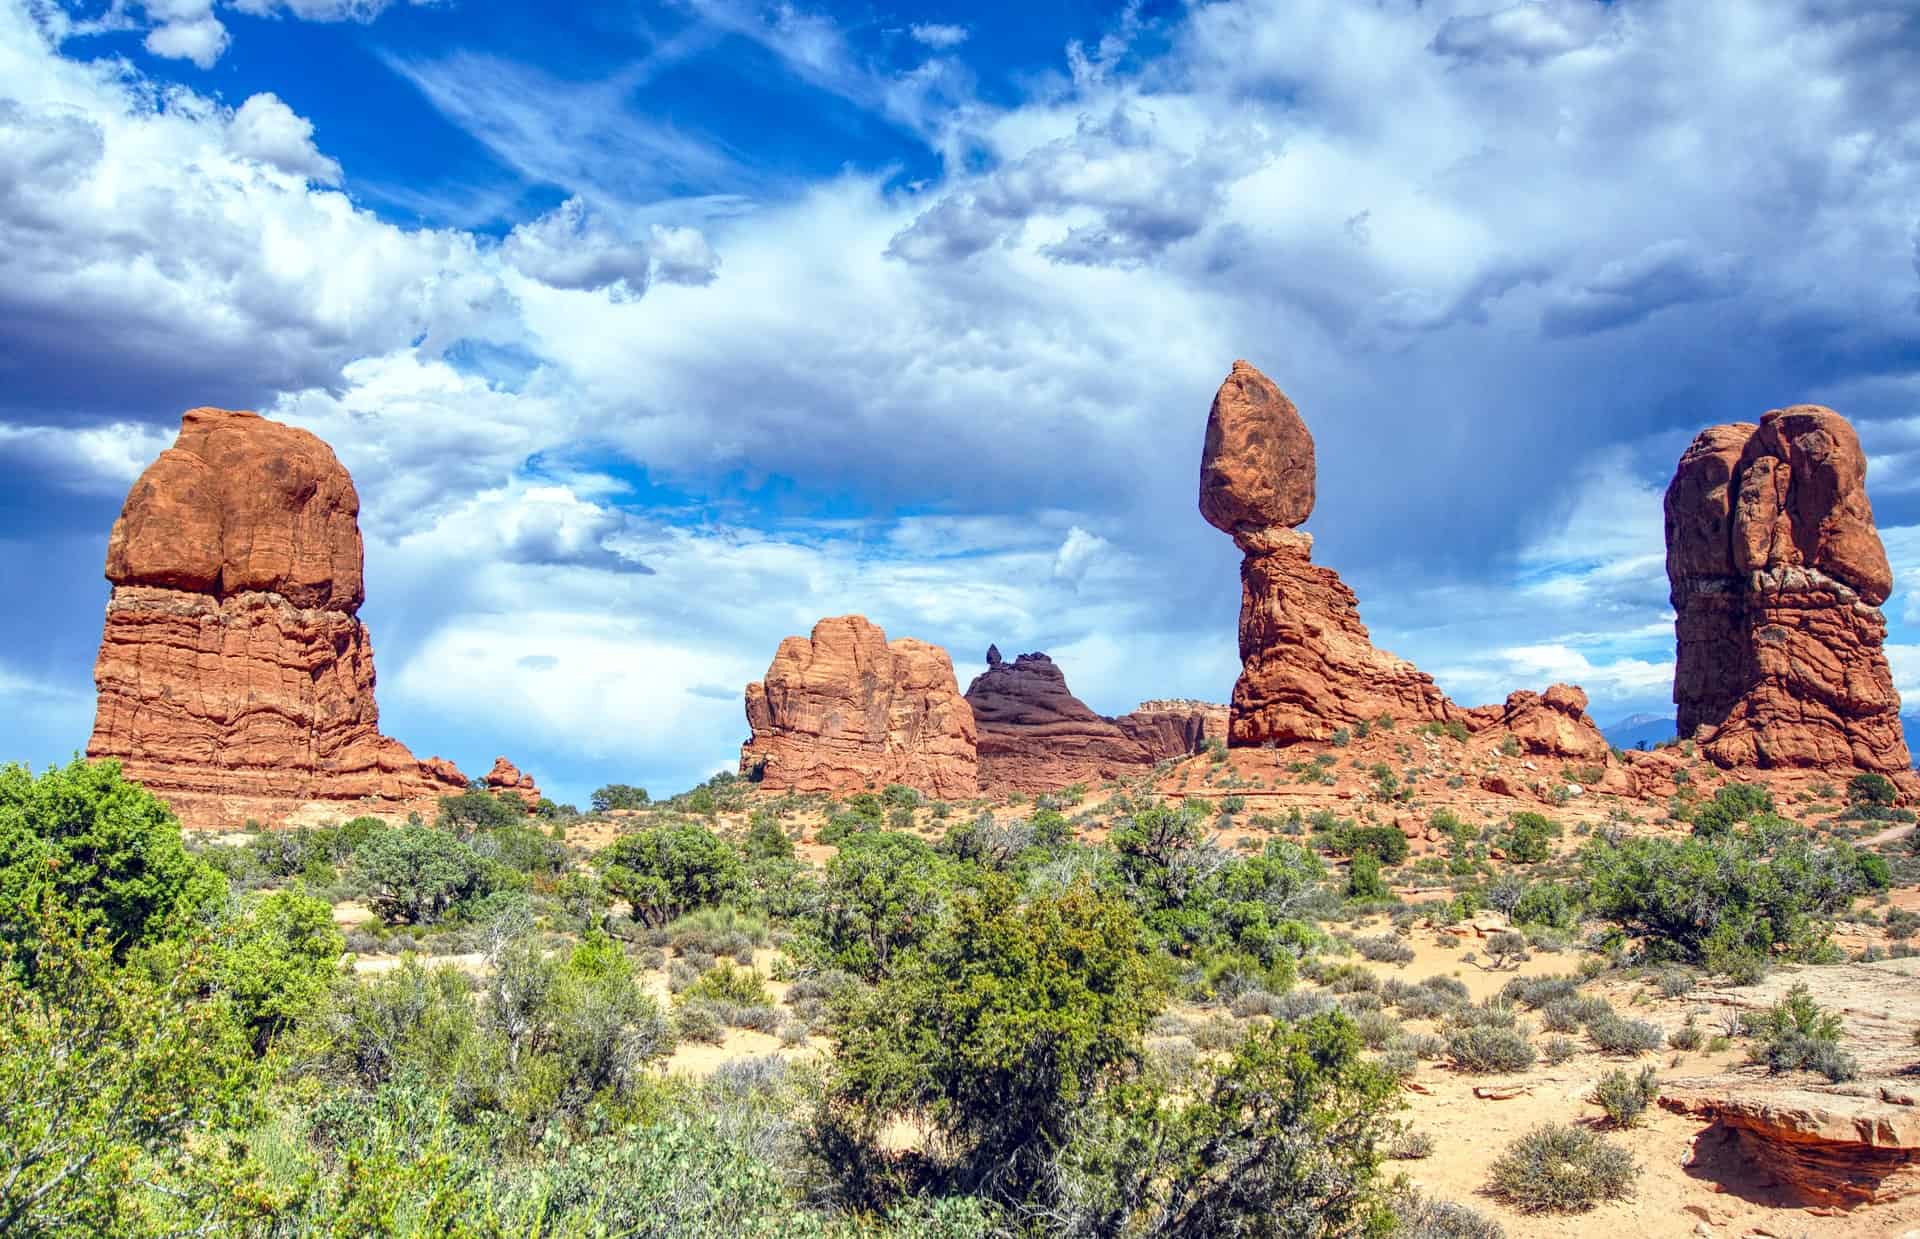 Best things to do in Moab Utah - Rosanne McHenry - Balanced Rock at Arches National Park by Michael Hart on Unsplash